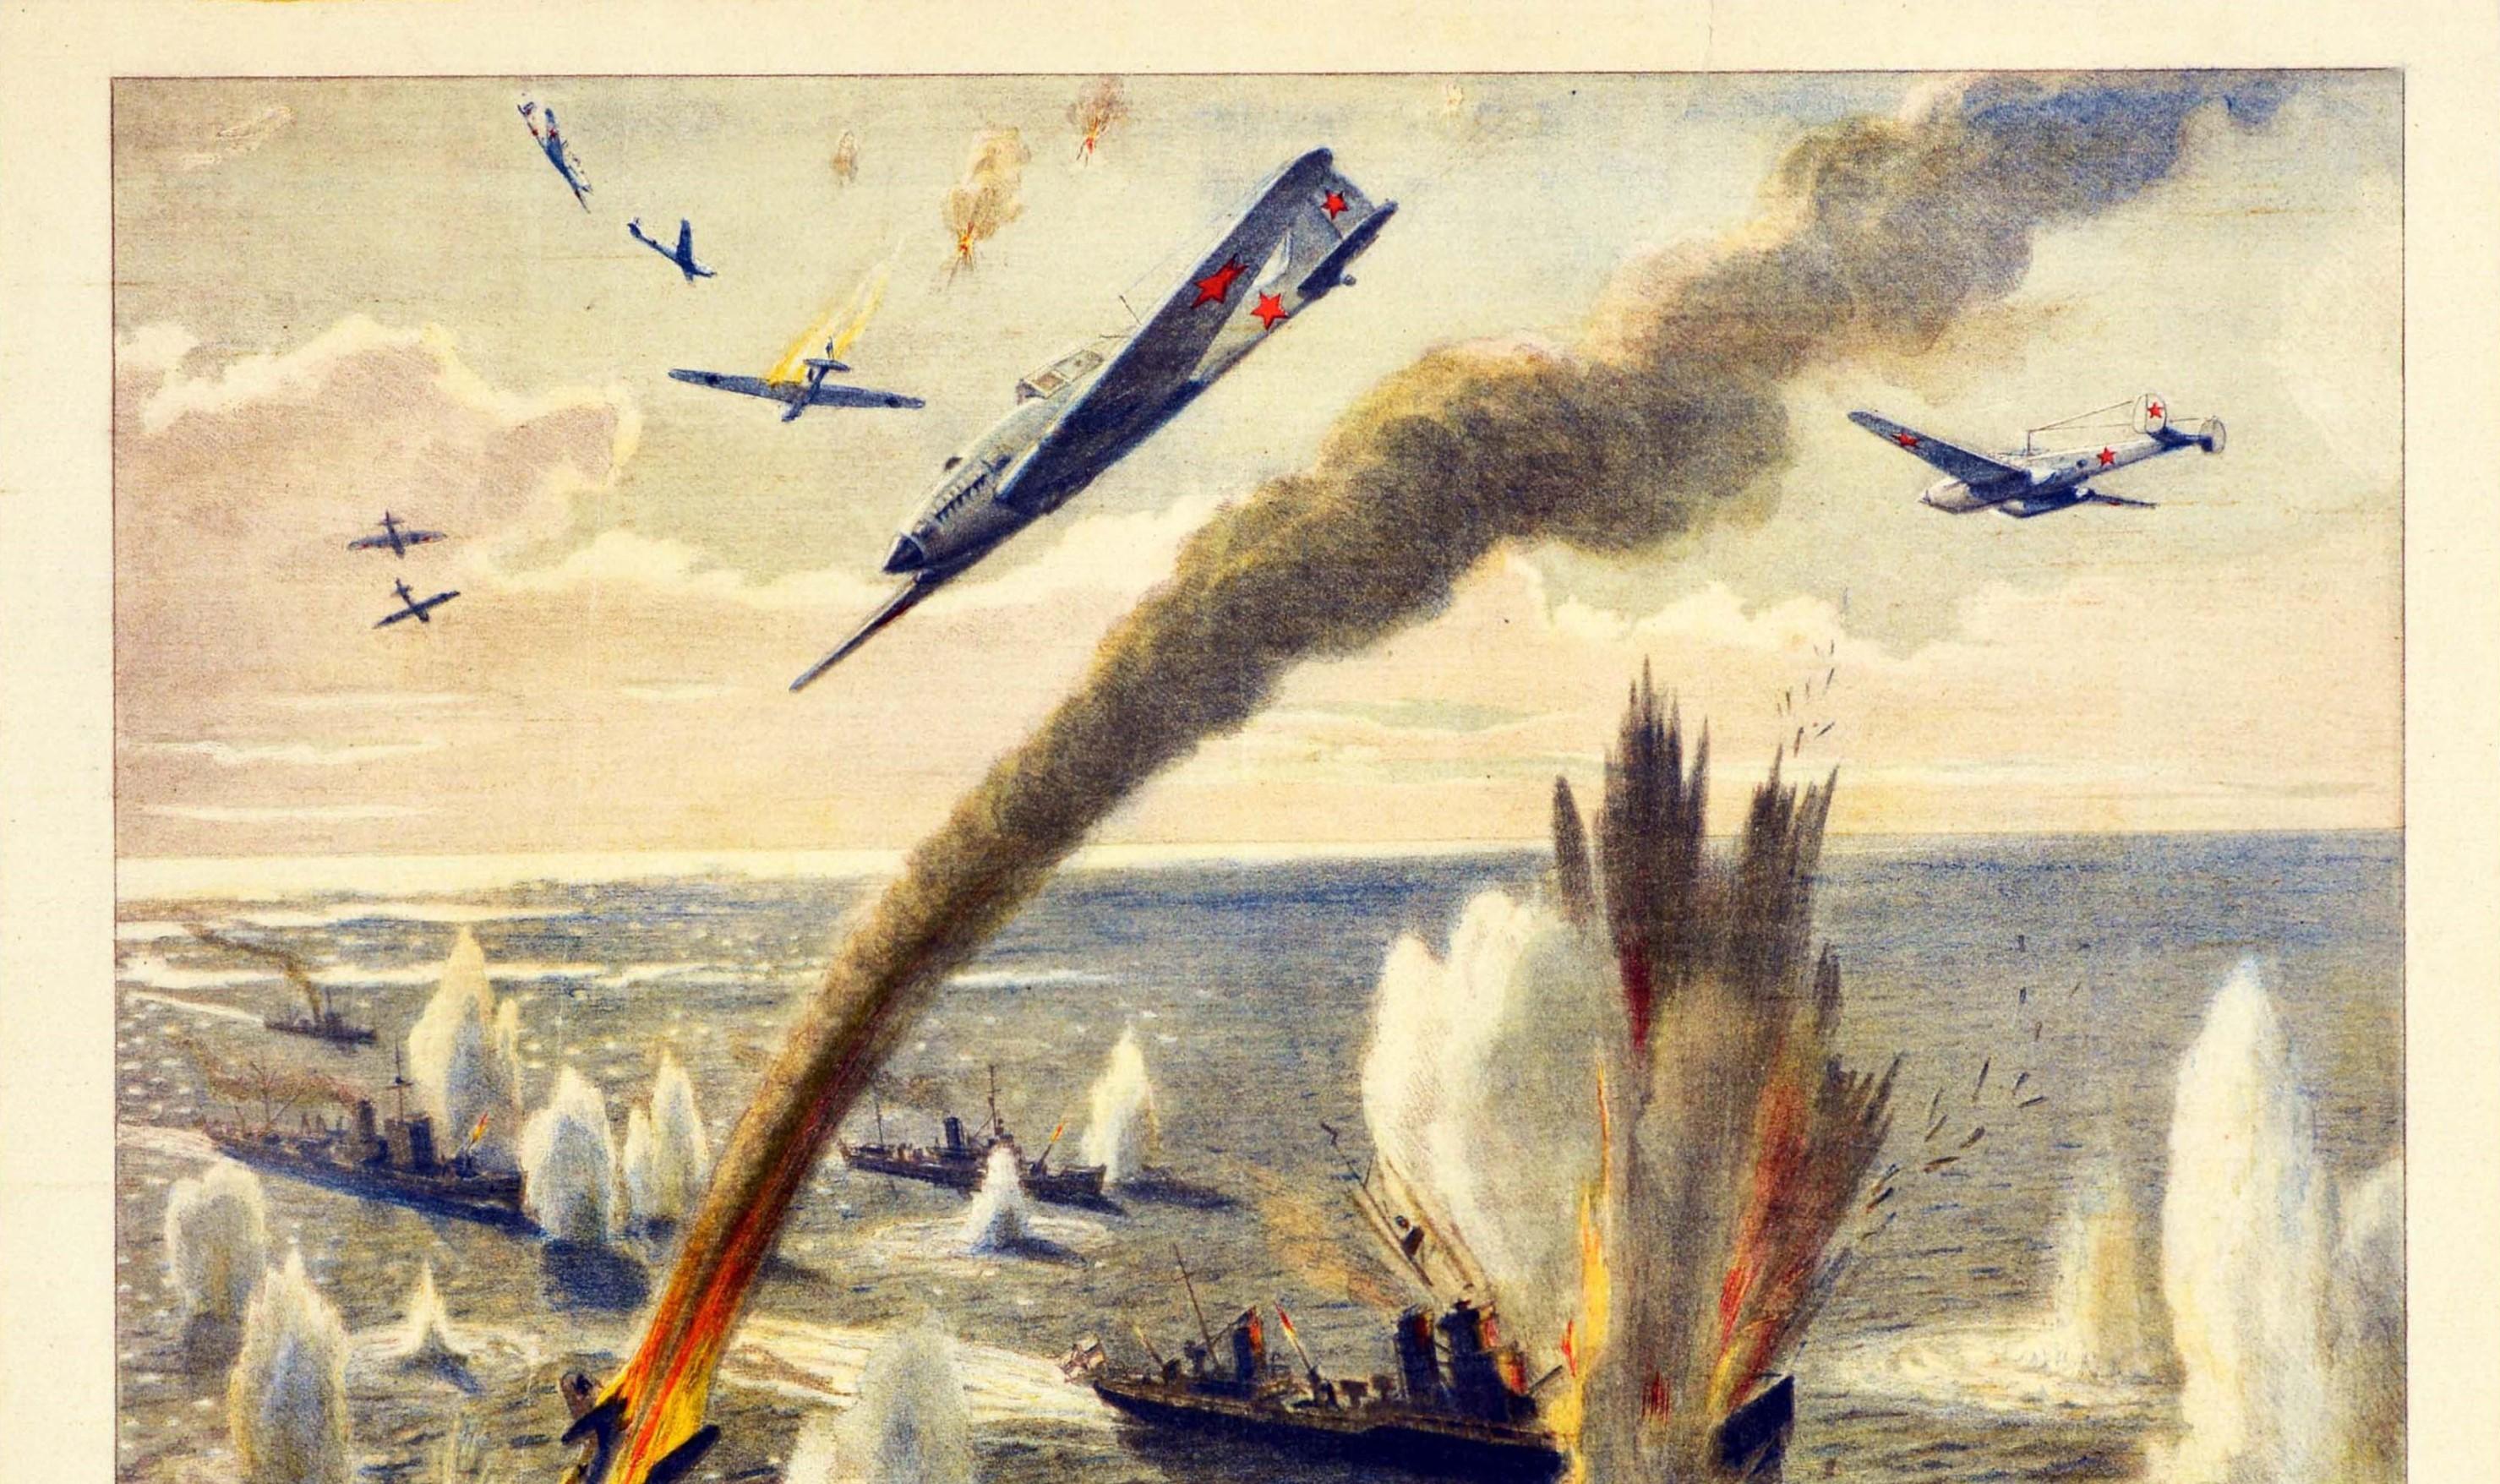 Original vintage World War Two poster depicting a battle scene showing Baltic pilots destroying enemy warships at sea with an illustration of planes flying through smoke in the sky and bombing the ships with a burning plane diving into the sea,